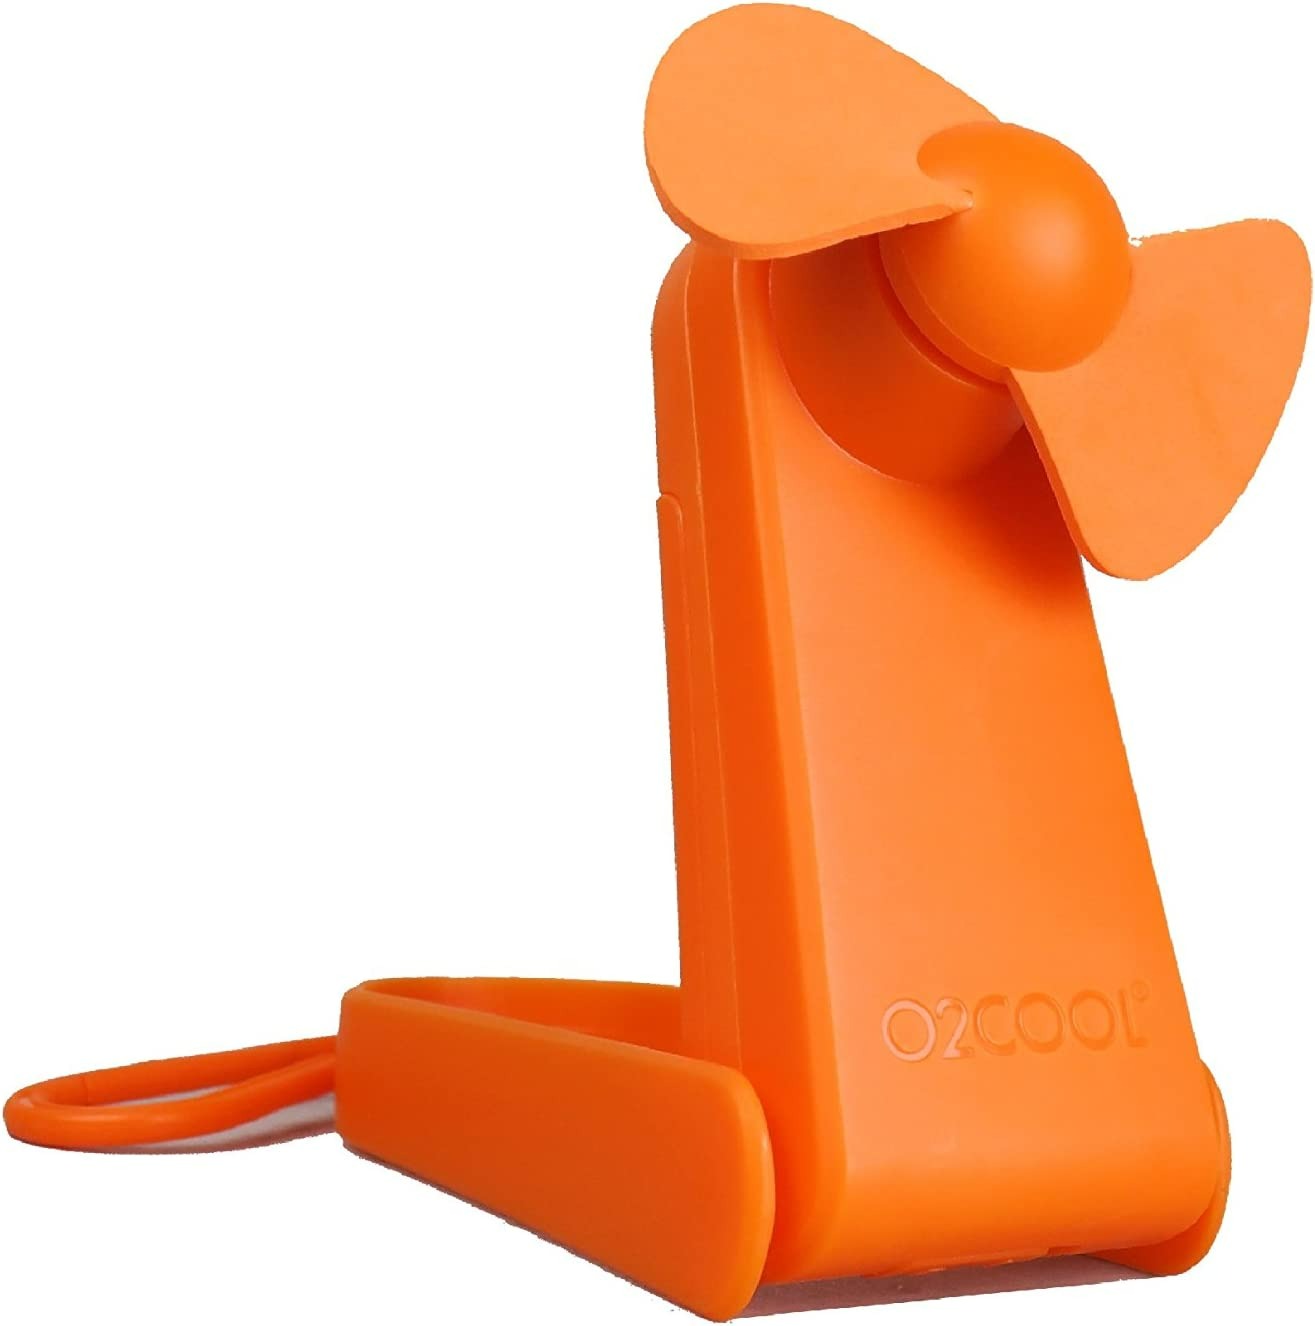 O2COOL Personal Battery Pocket and Table Desk Fan - Orange-0